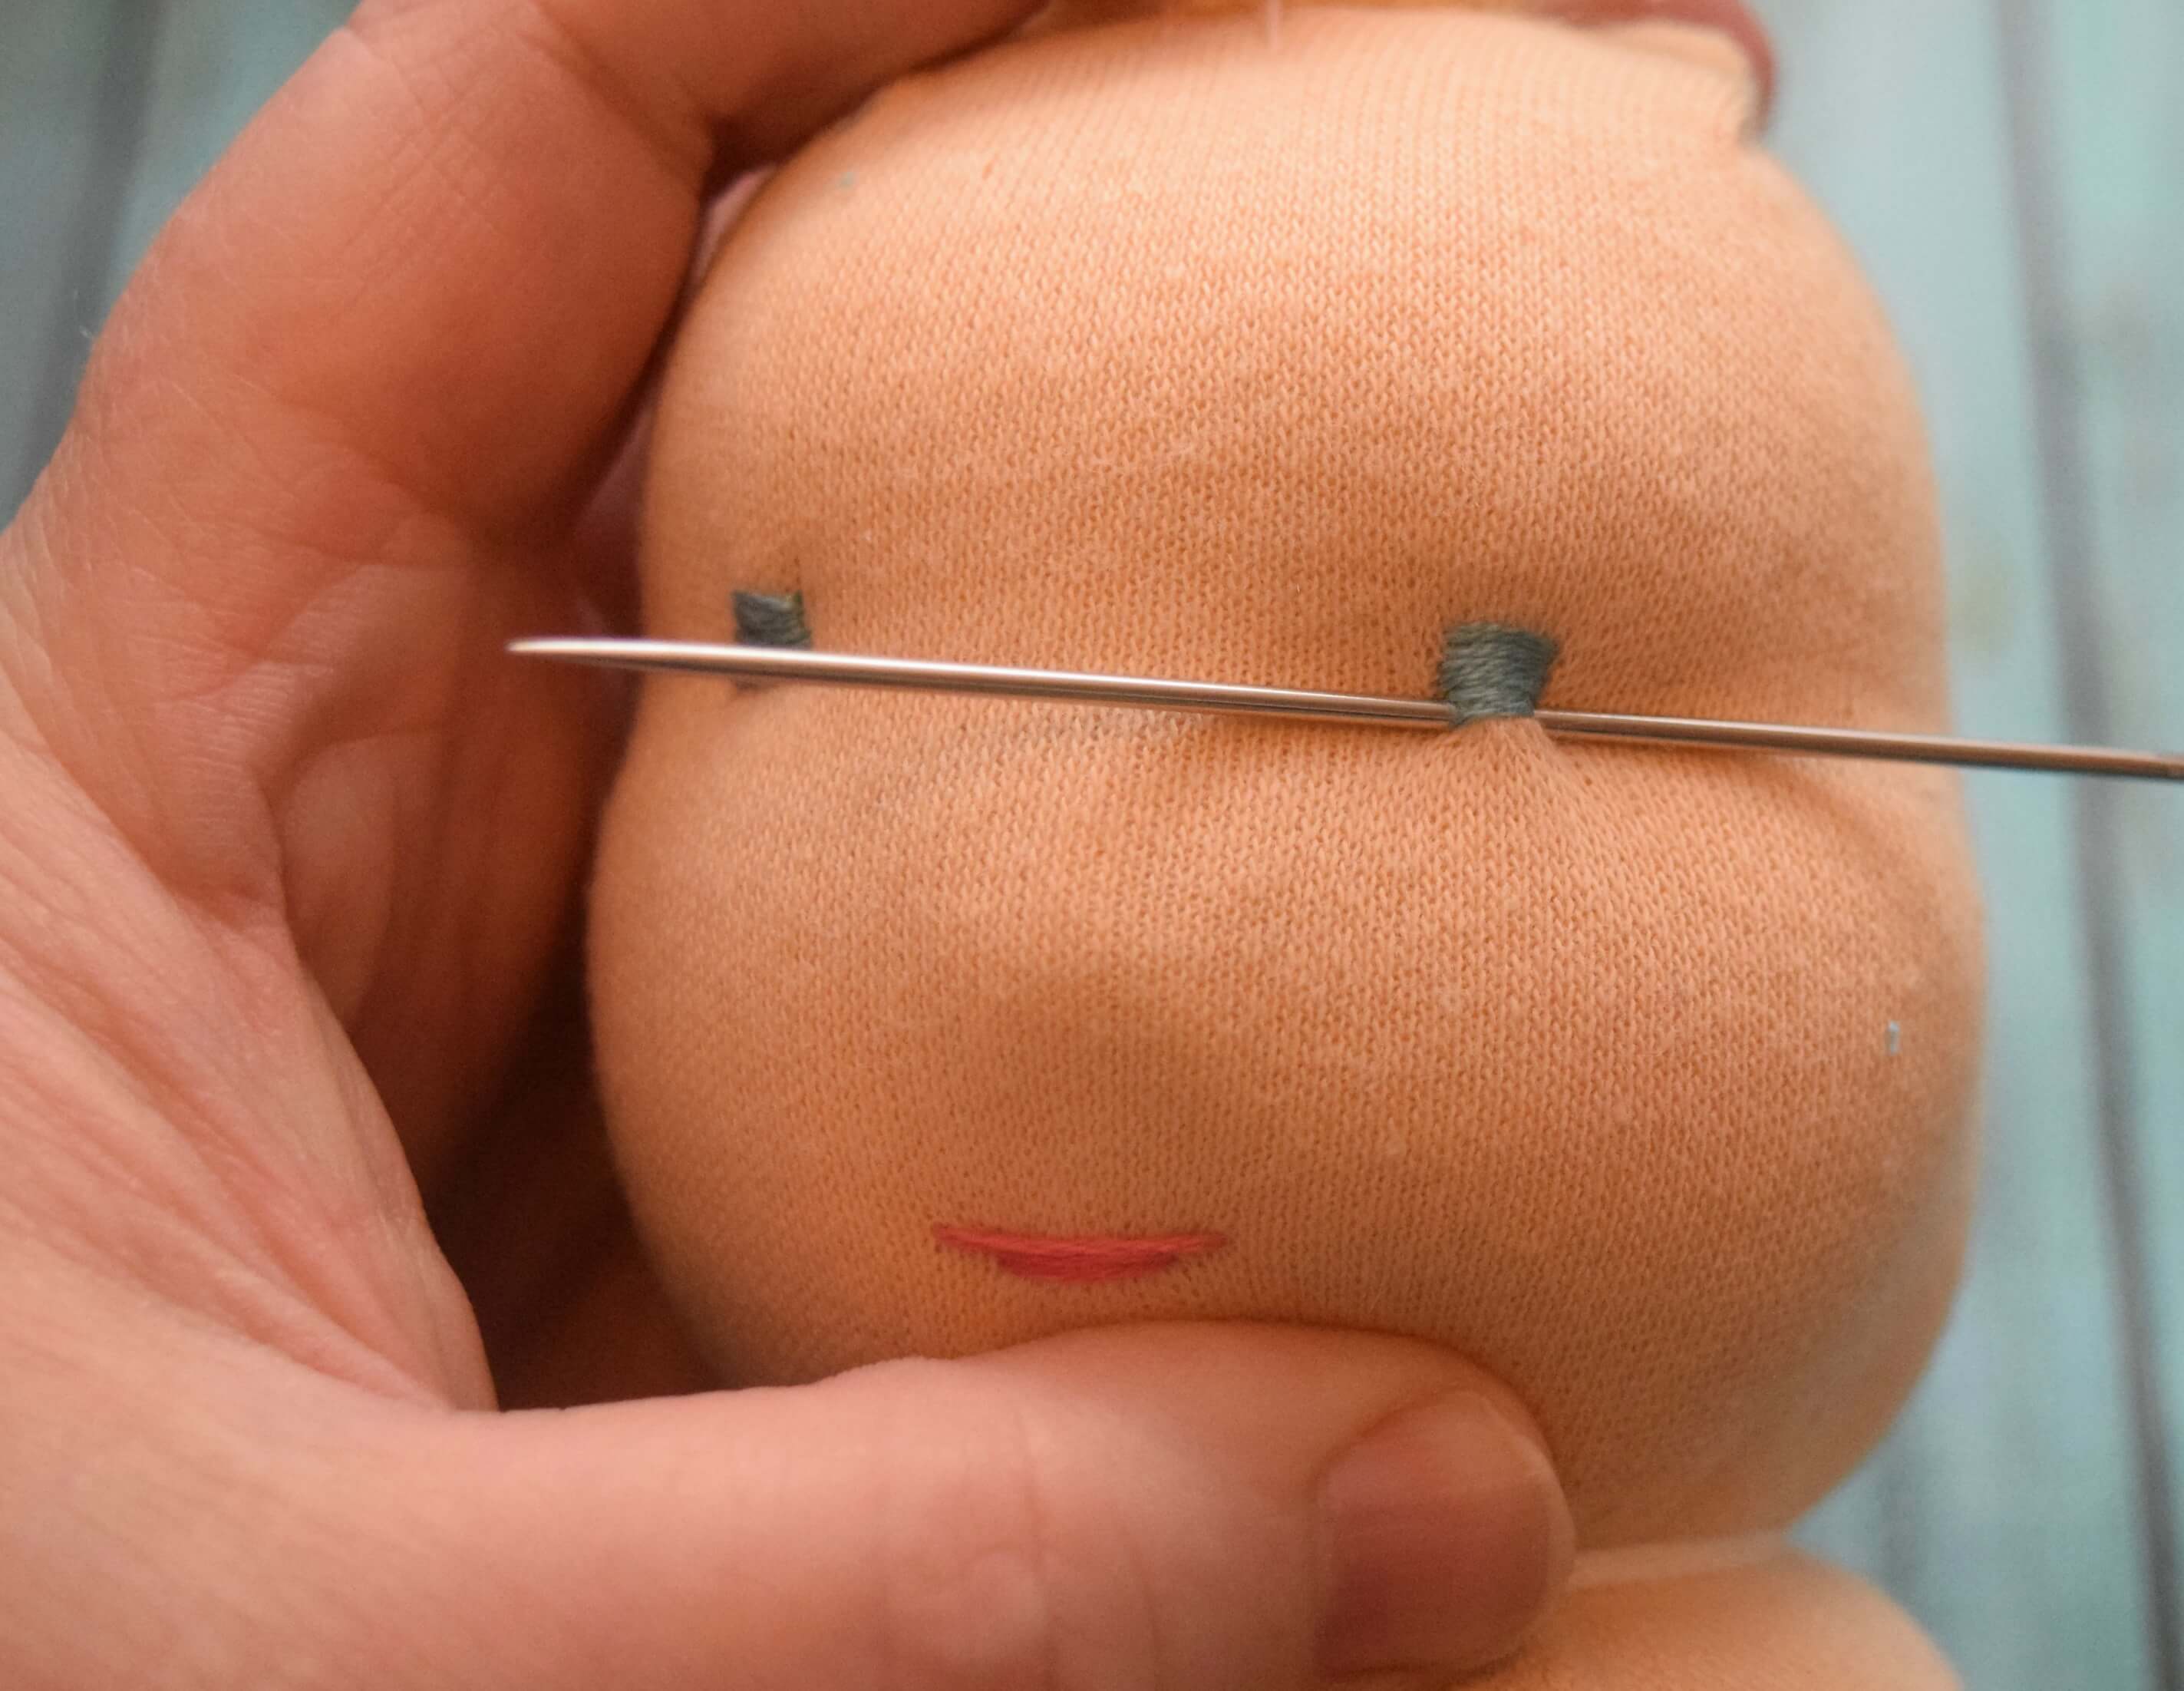 Using an embroidery needle to sew a satin stitch eye on the swaddle baby doll.